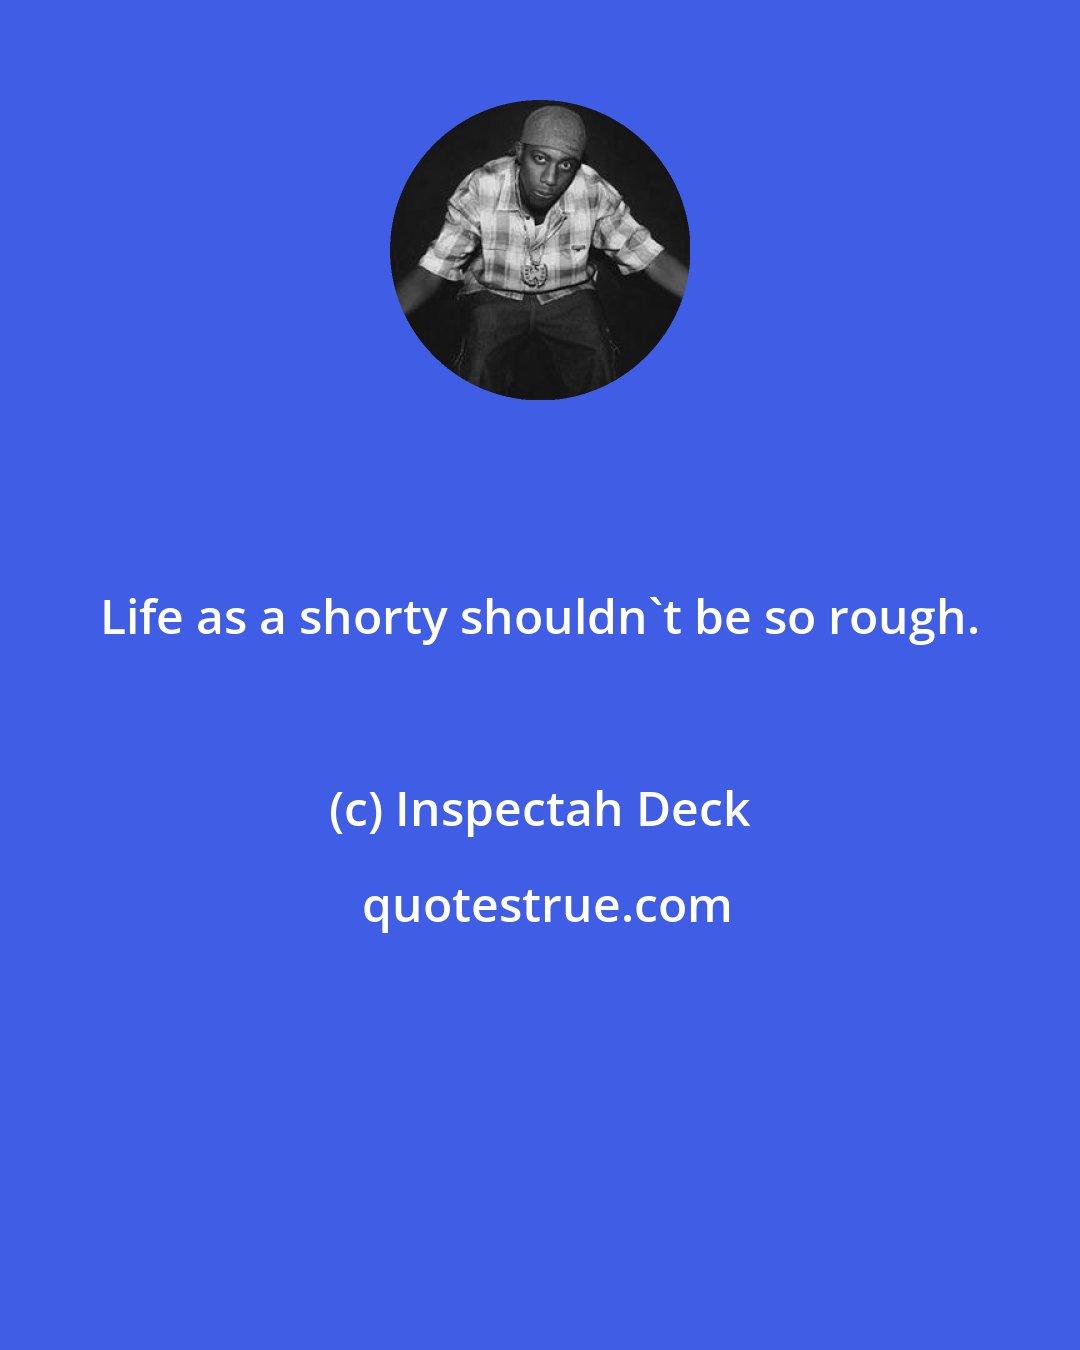 Inspectah Deck: Life as a shorty shouldn't be so rough.